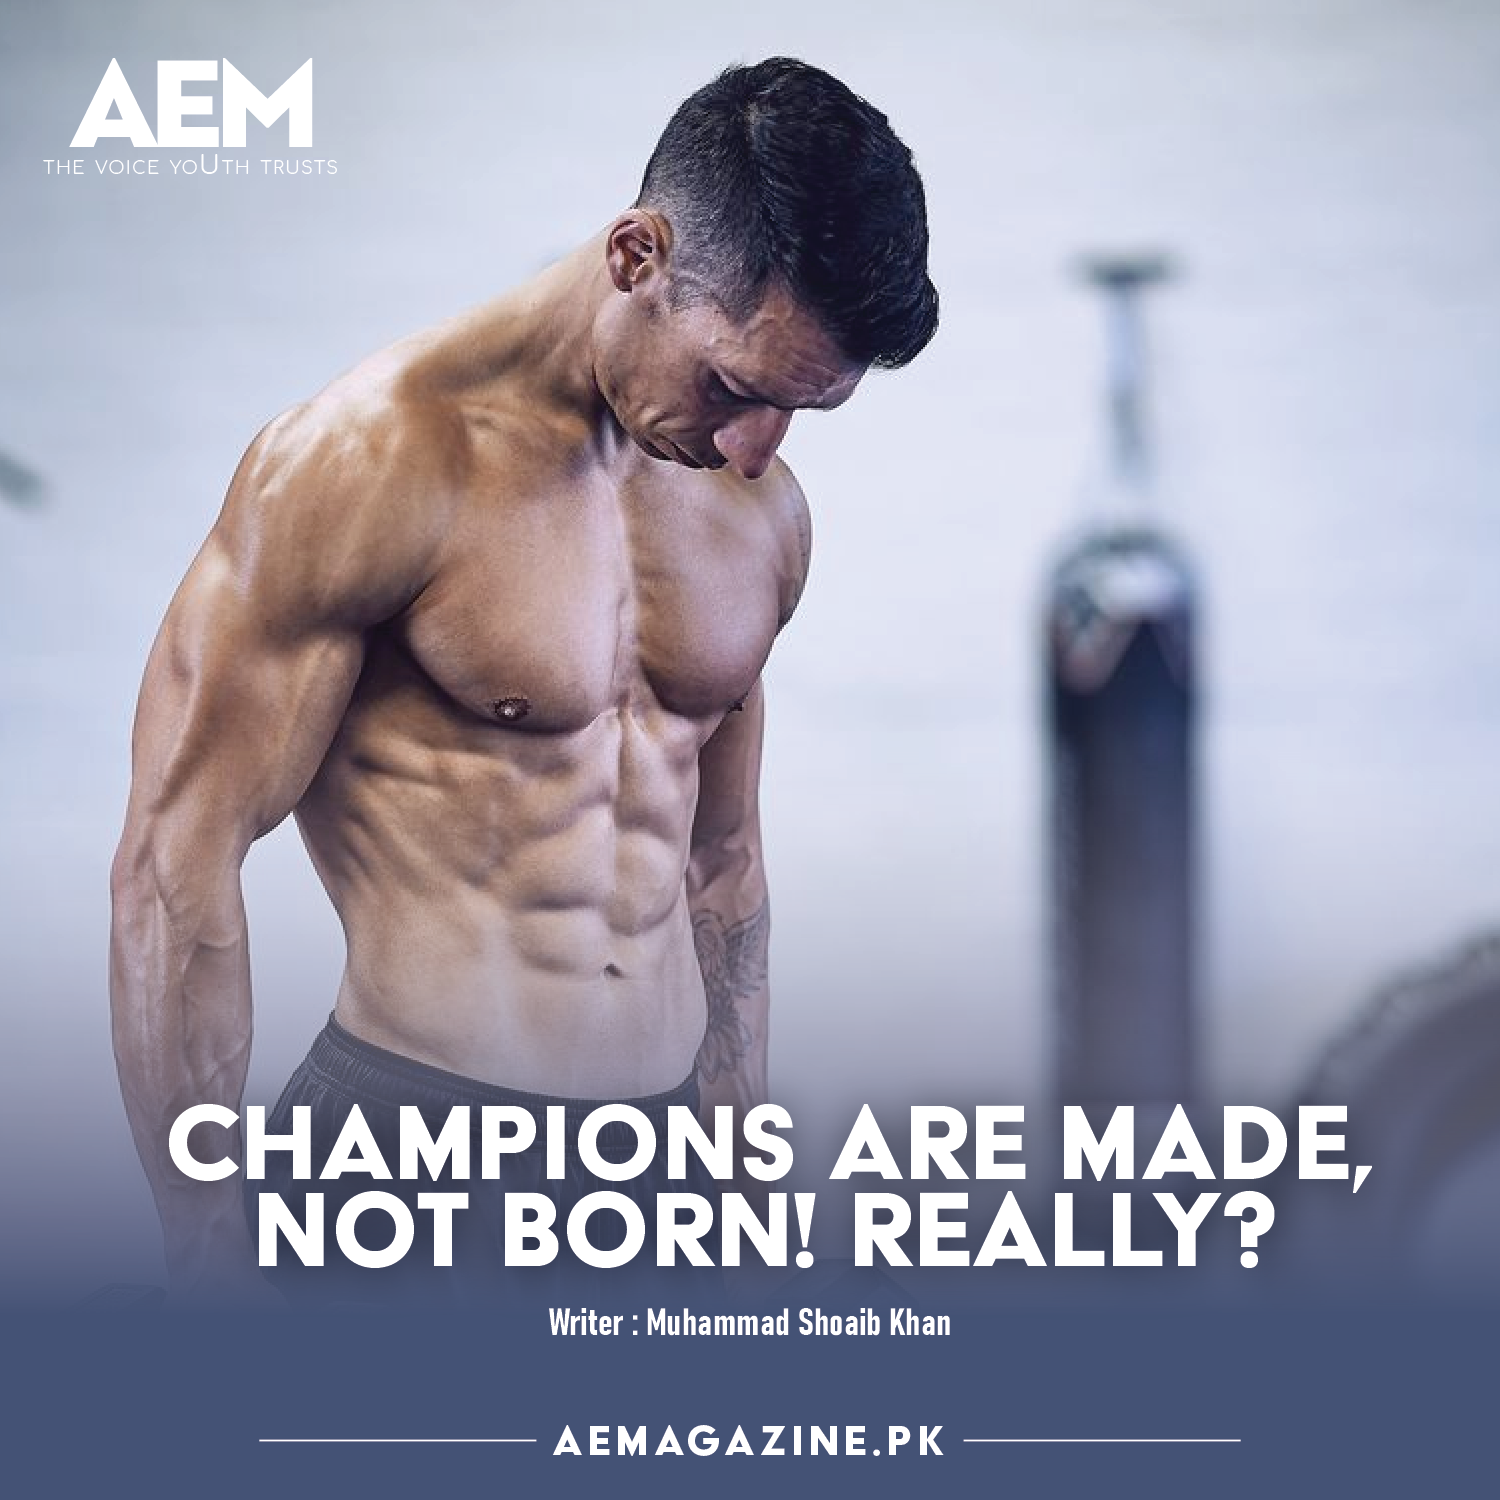 Champions Are Made, Not Born! Really?